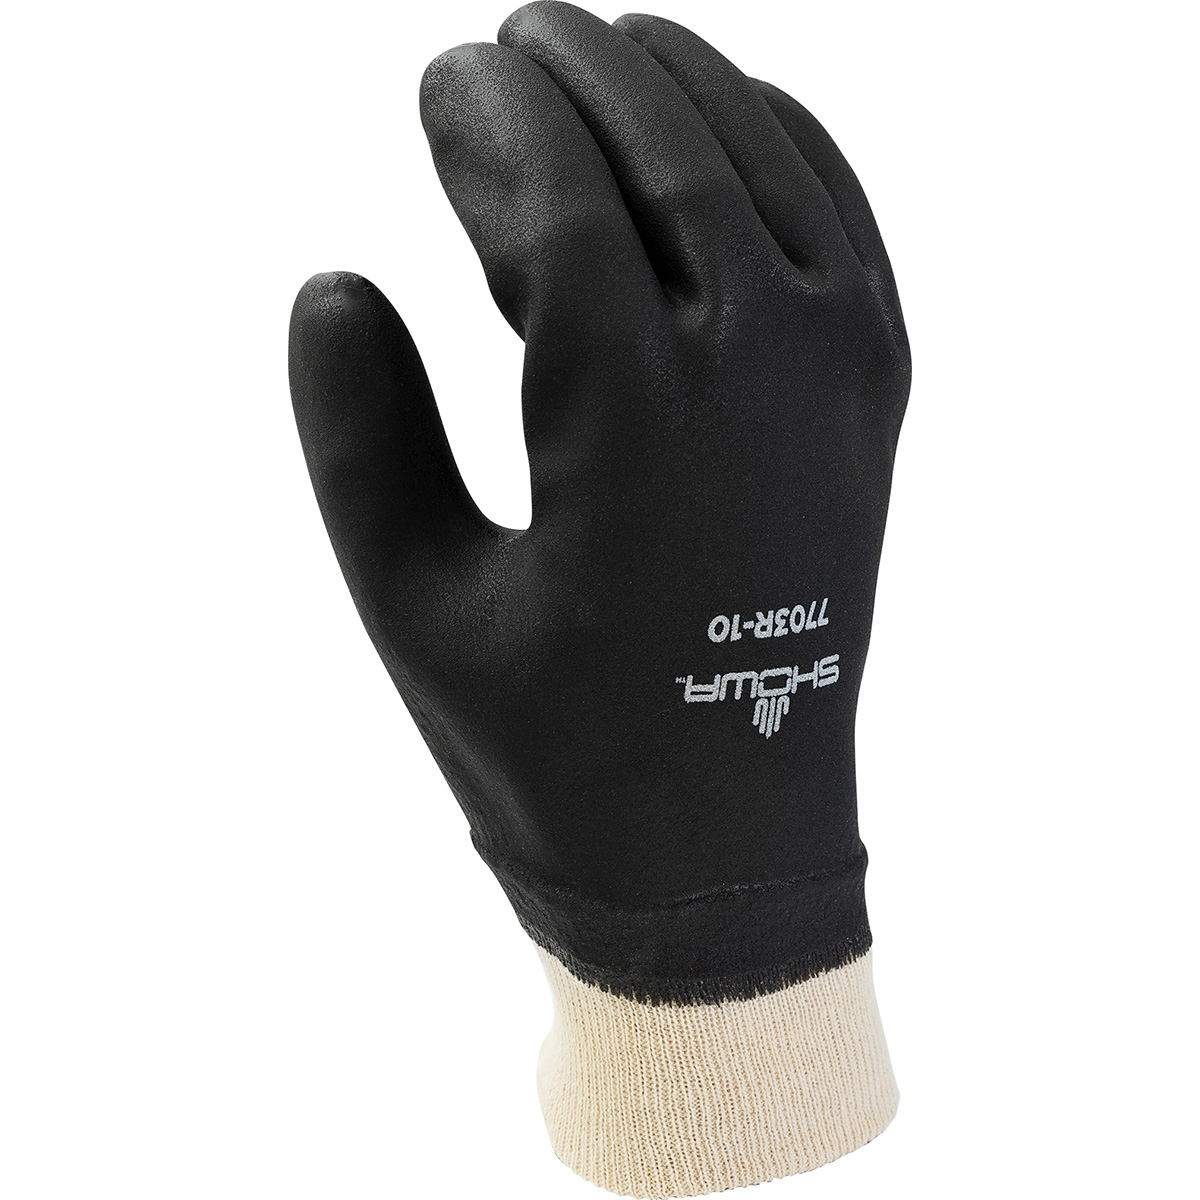 All general-purpose industrial application, PVC fully coated knit wrist w/jersey liner, Sanitized, black, rough finish, large - General Purpose